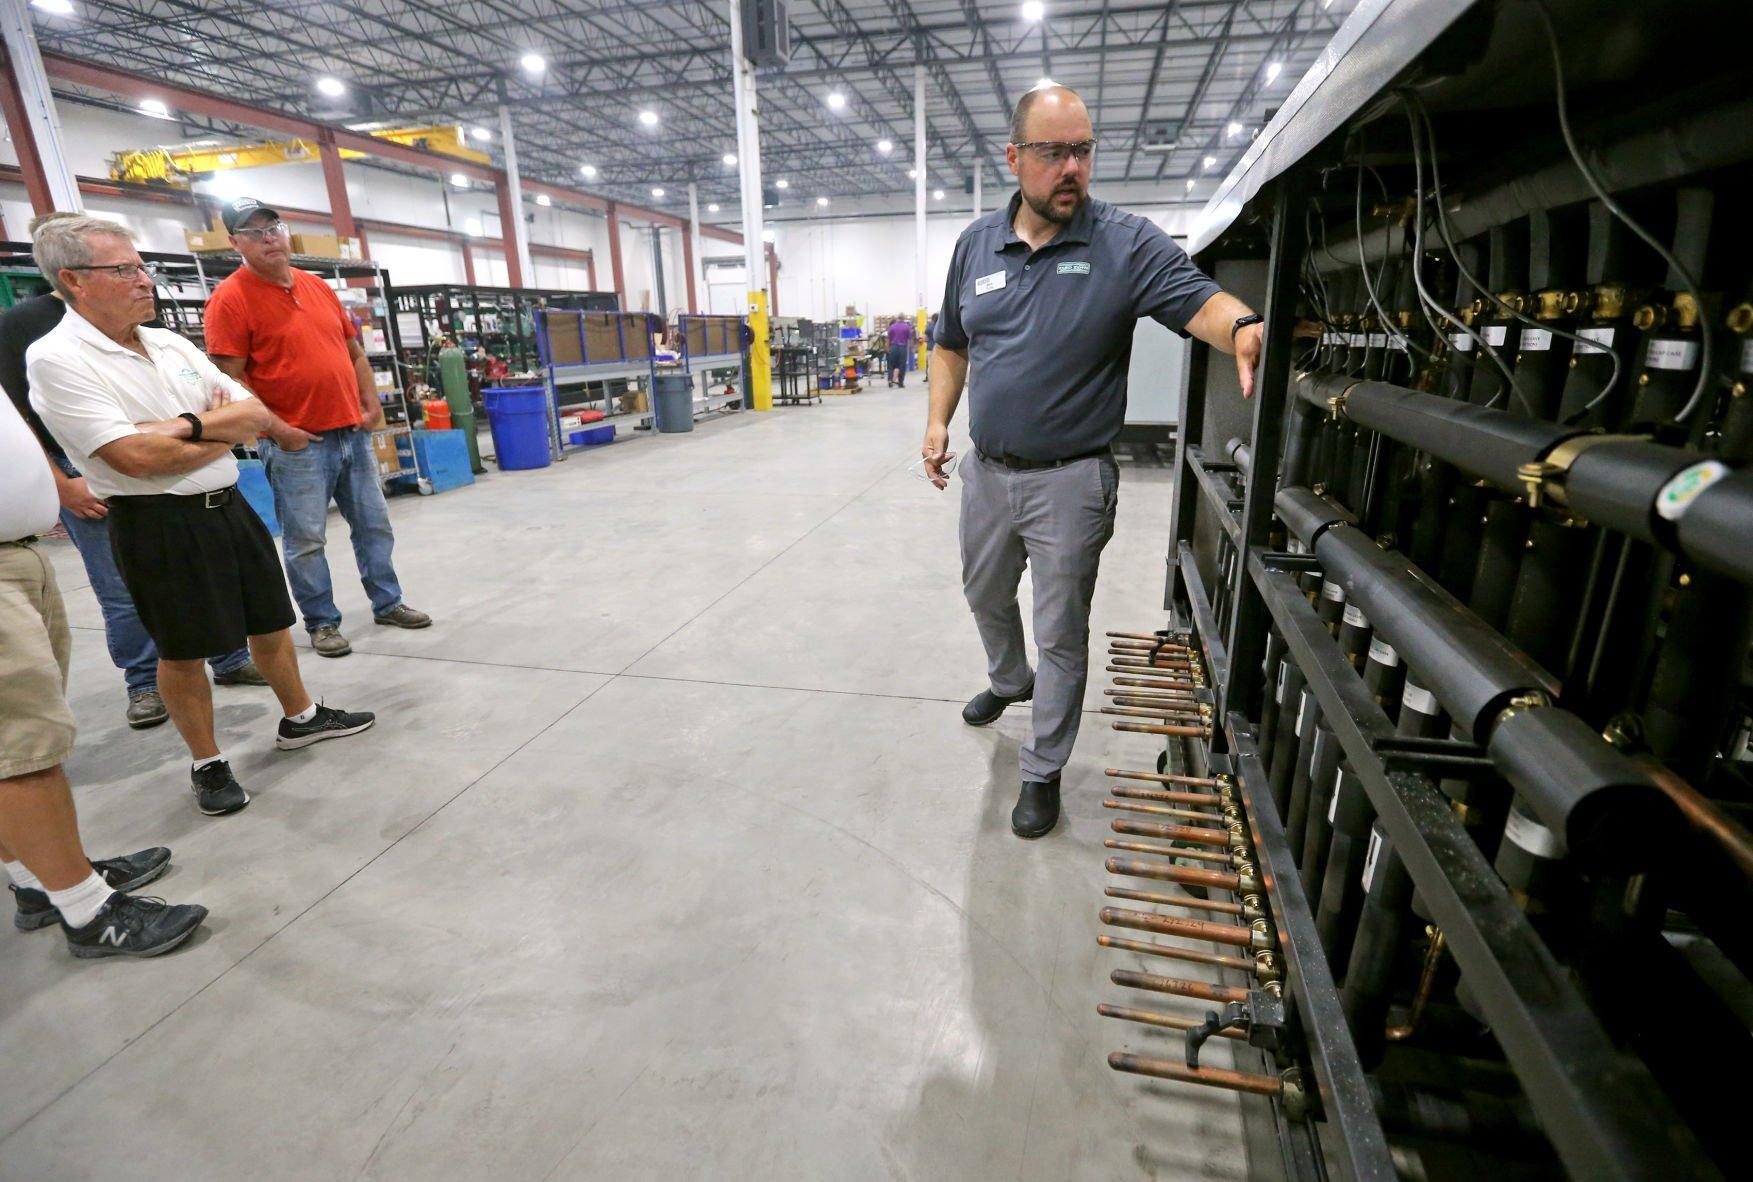 Ben Fisher (right) gives a tour of Zero Zone during an event at the facility in Dyersville, Iowa, on Wednesday, July 20, 2022.    PHOTO CREDIT: JESSICA REILLY